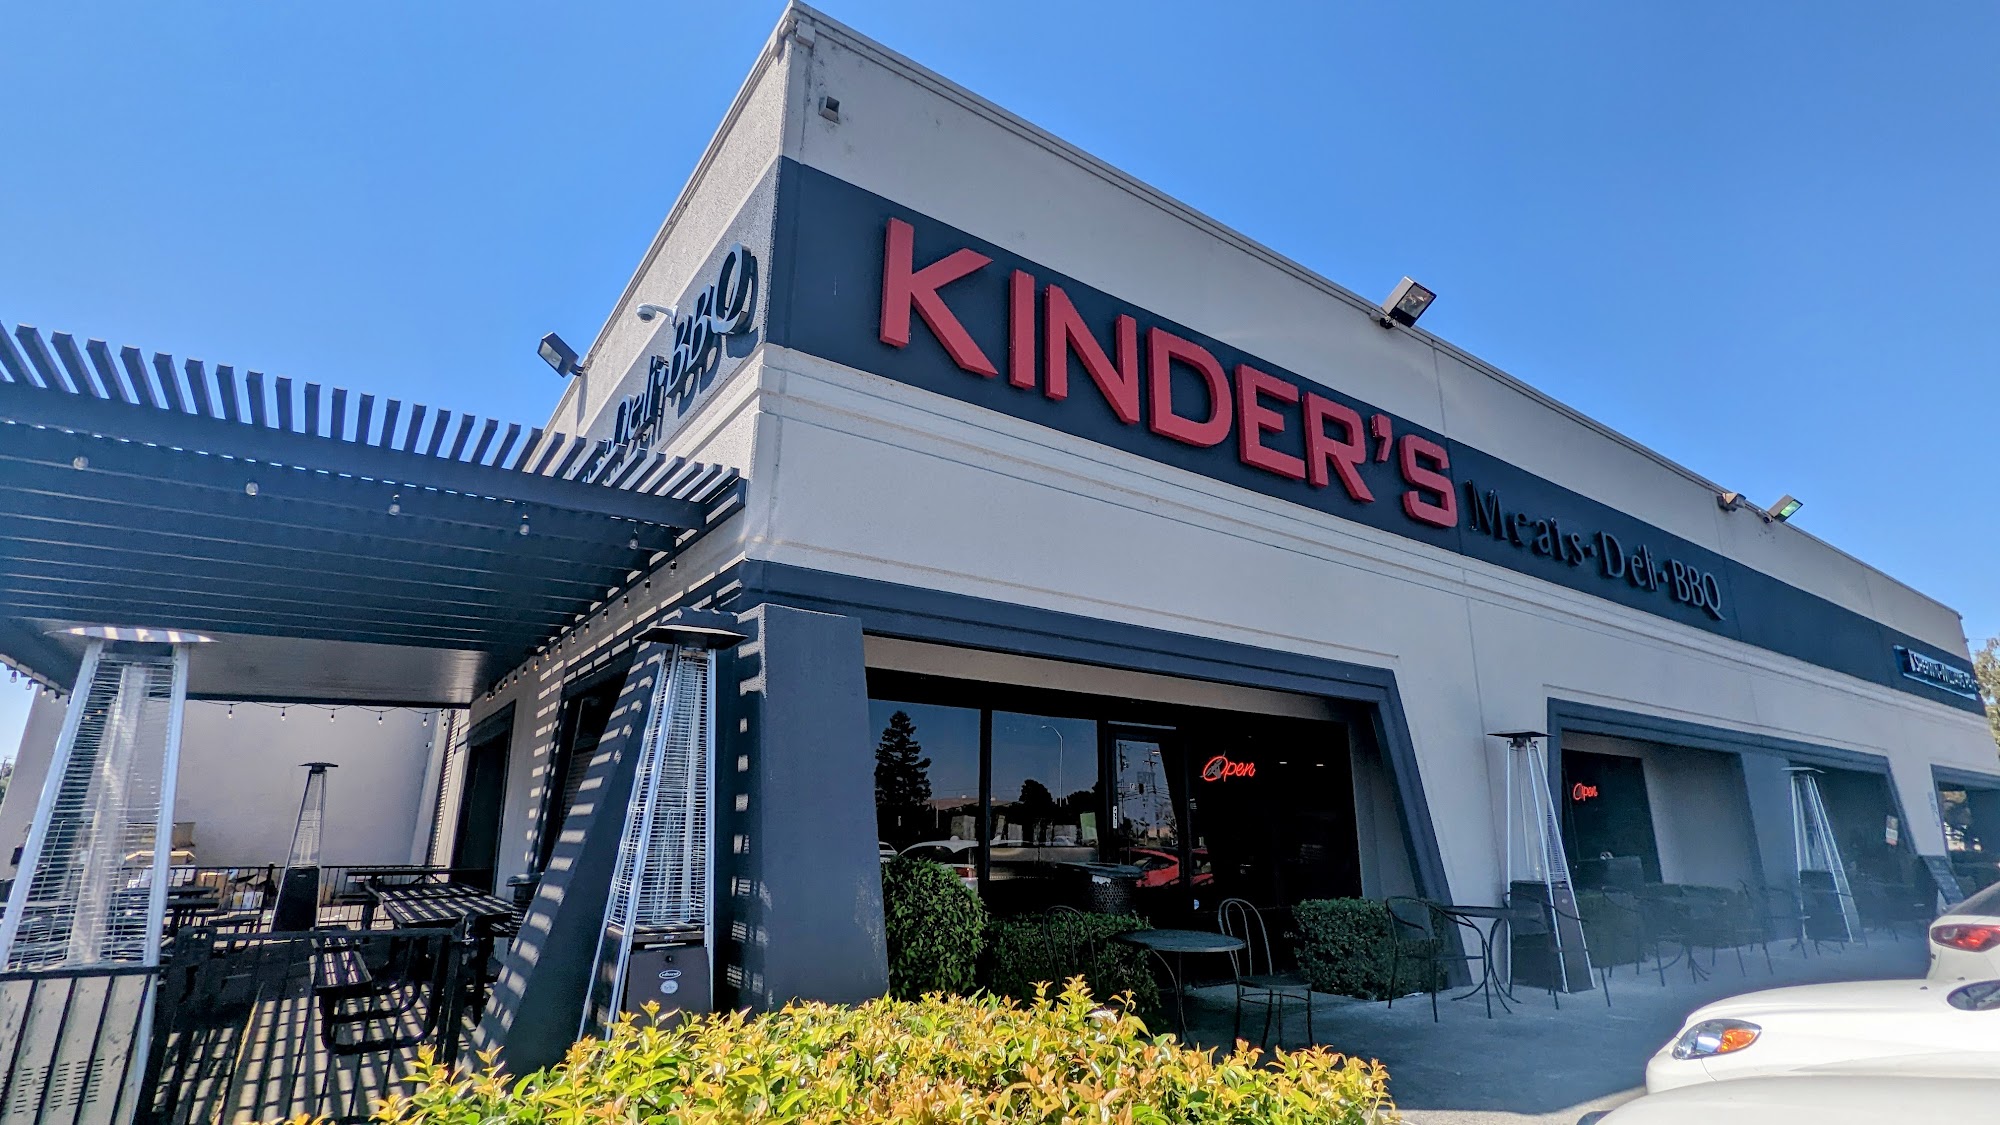 Kinder's Meats Deli BBQ & Catering